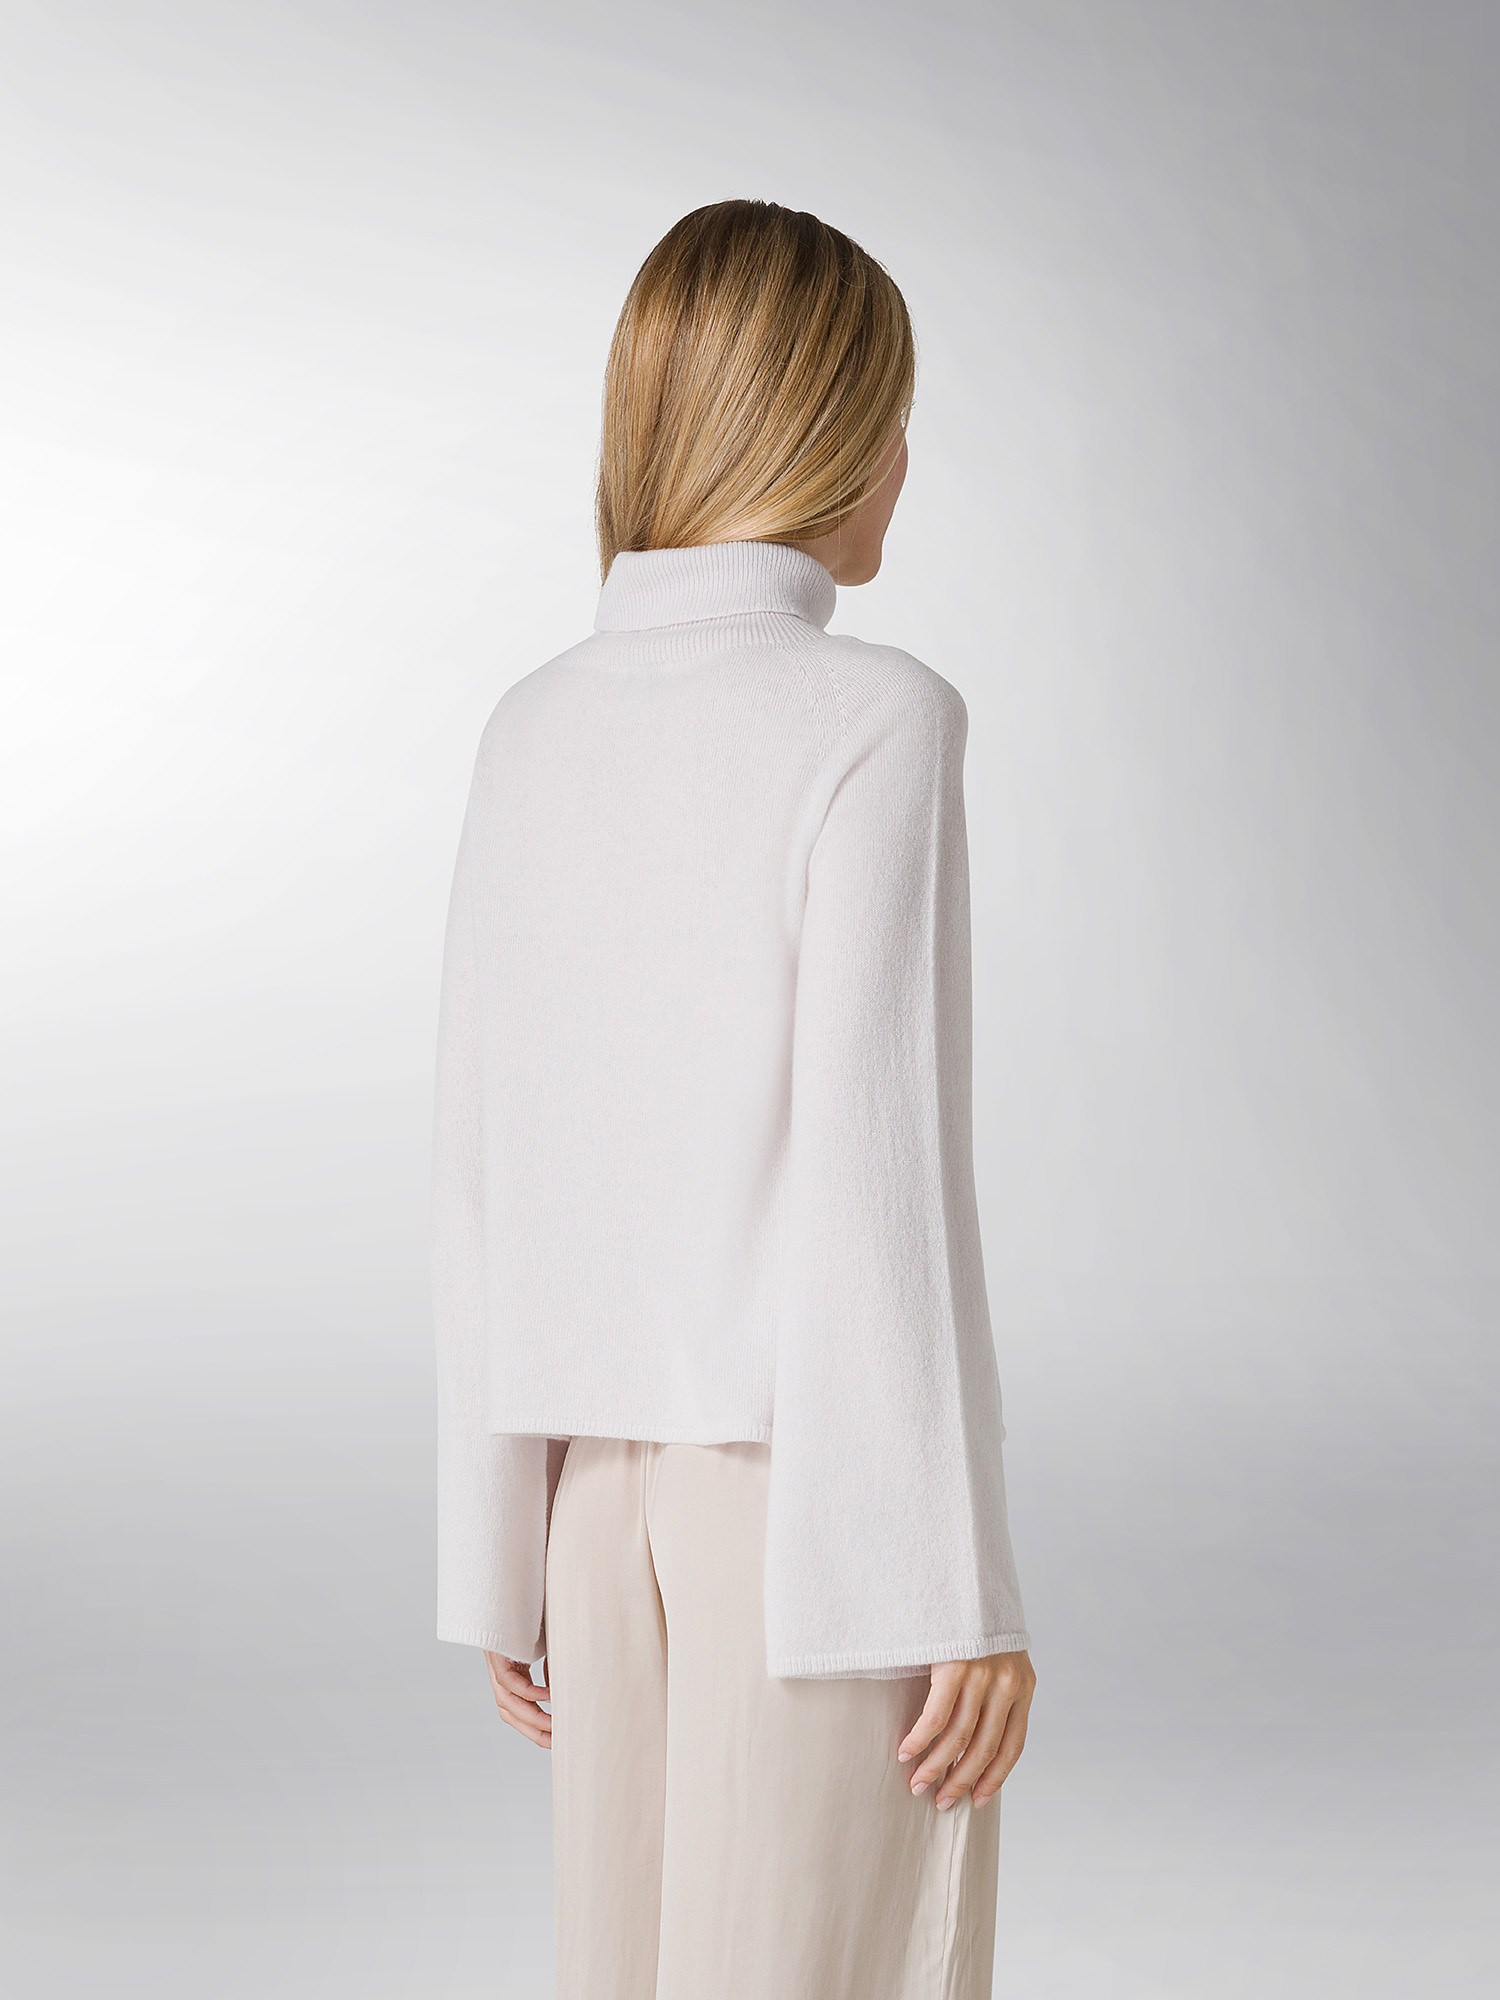 Coin Cashmere - Turtleneck in pure premium cashmere, White, large image number 2